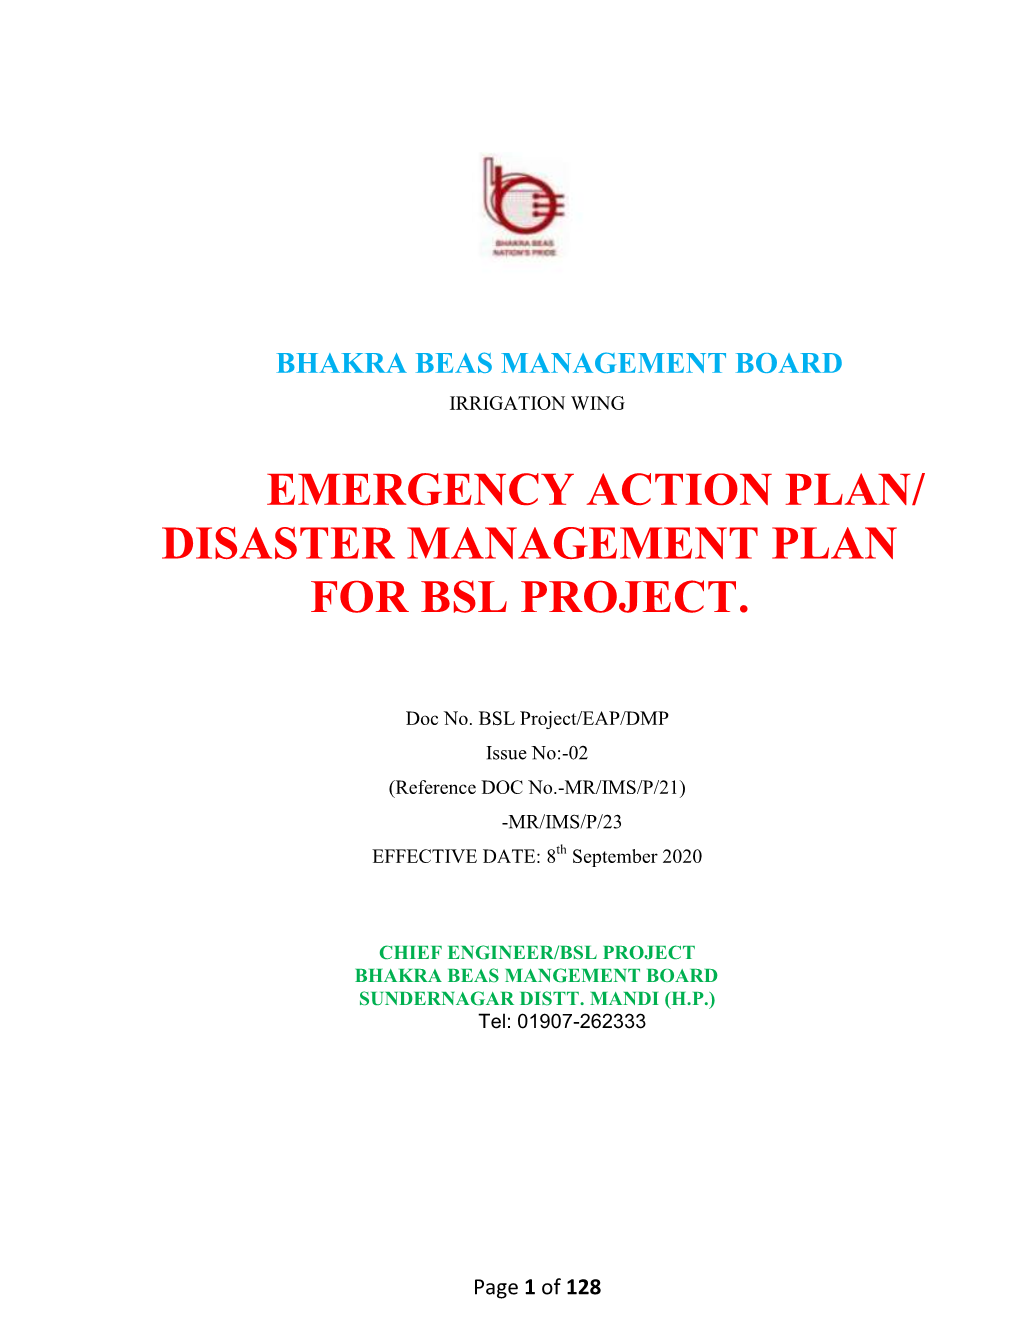 Emergency Action Plan/ Disaster Management Plan for Bsl Project